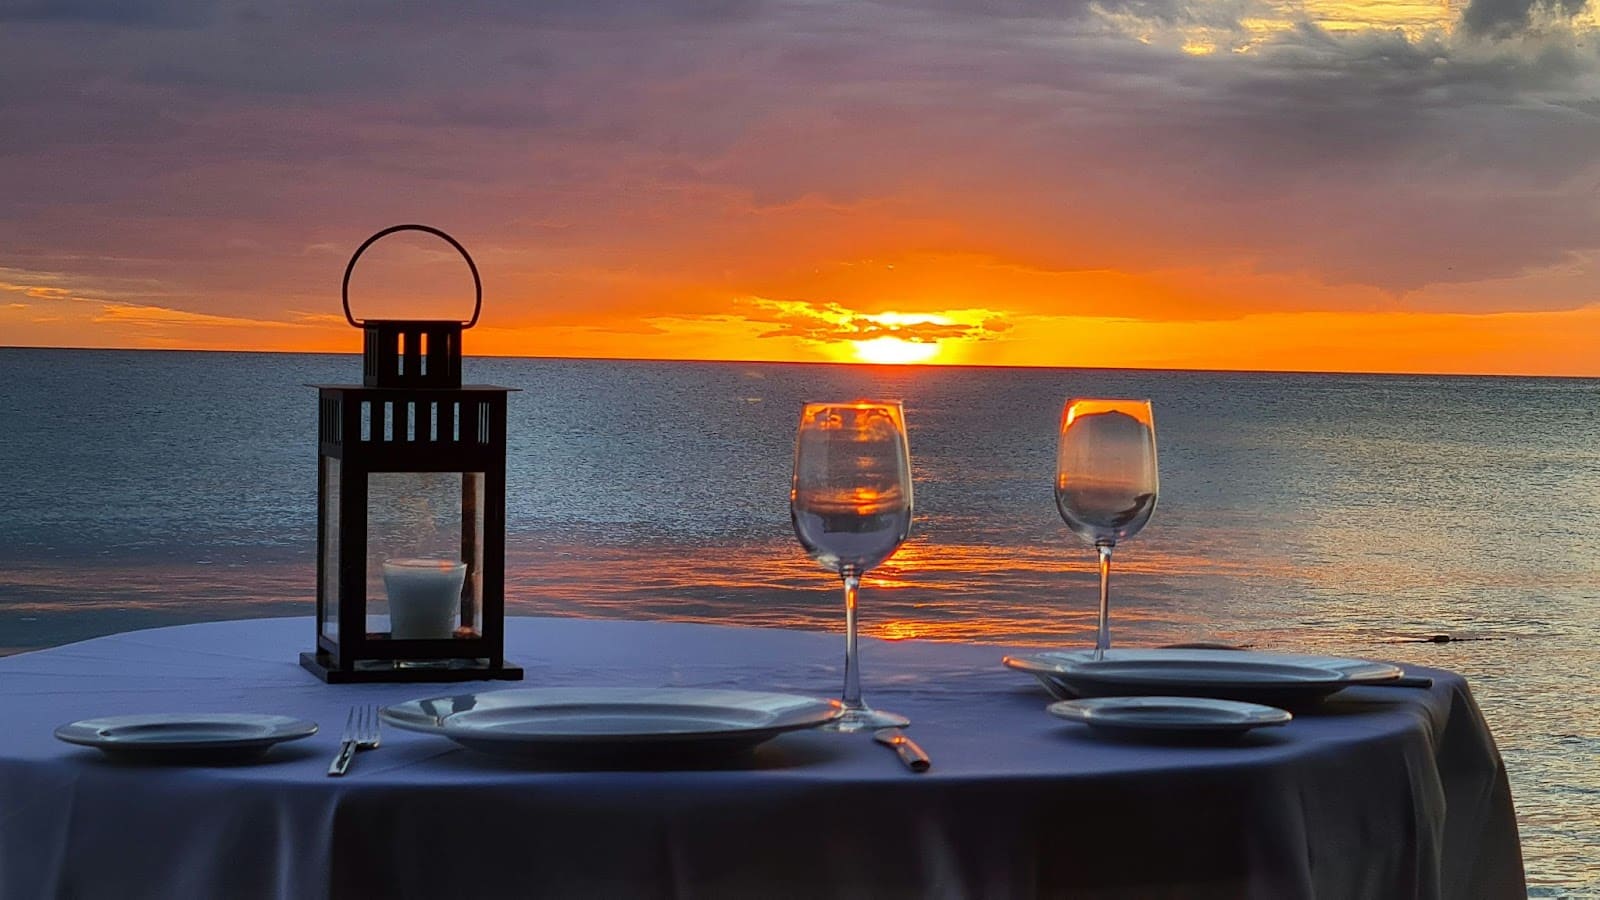 A dinner setting with a sunset view over the ocean.